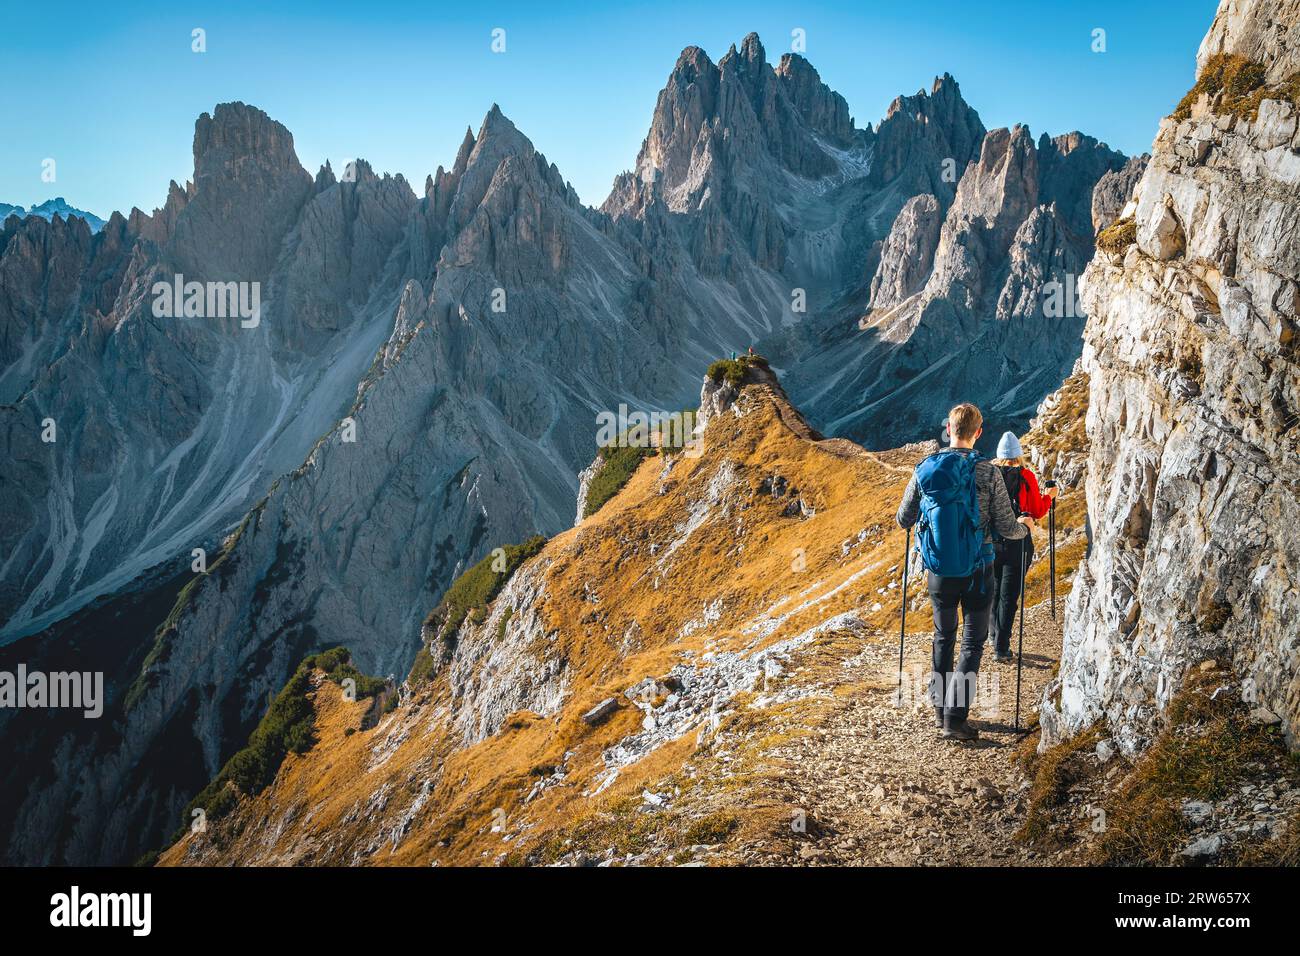 Well known hiking trail with hikers in Cadini mountain group, Dolomites, Italy, Europe Stock Photo